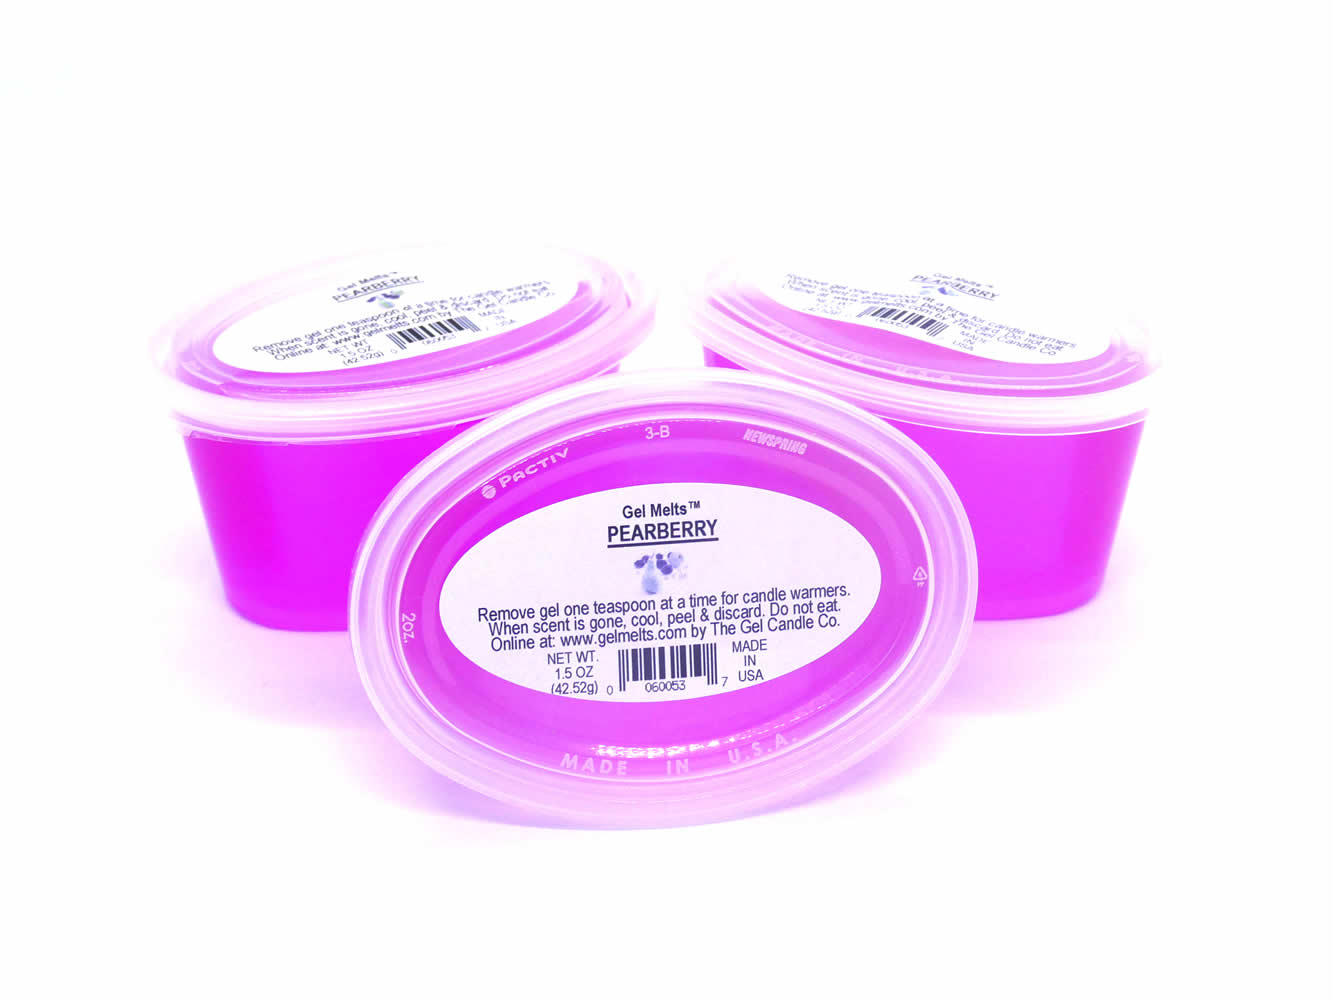 Pearberry scented Gel Melts™ Gel Wax for warmers - 3 pack - Click Image to Close